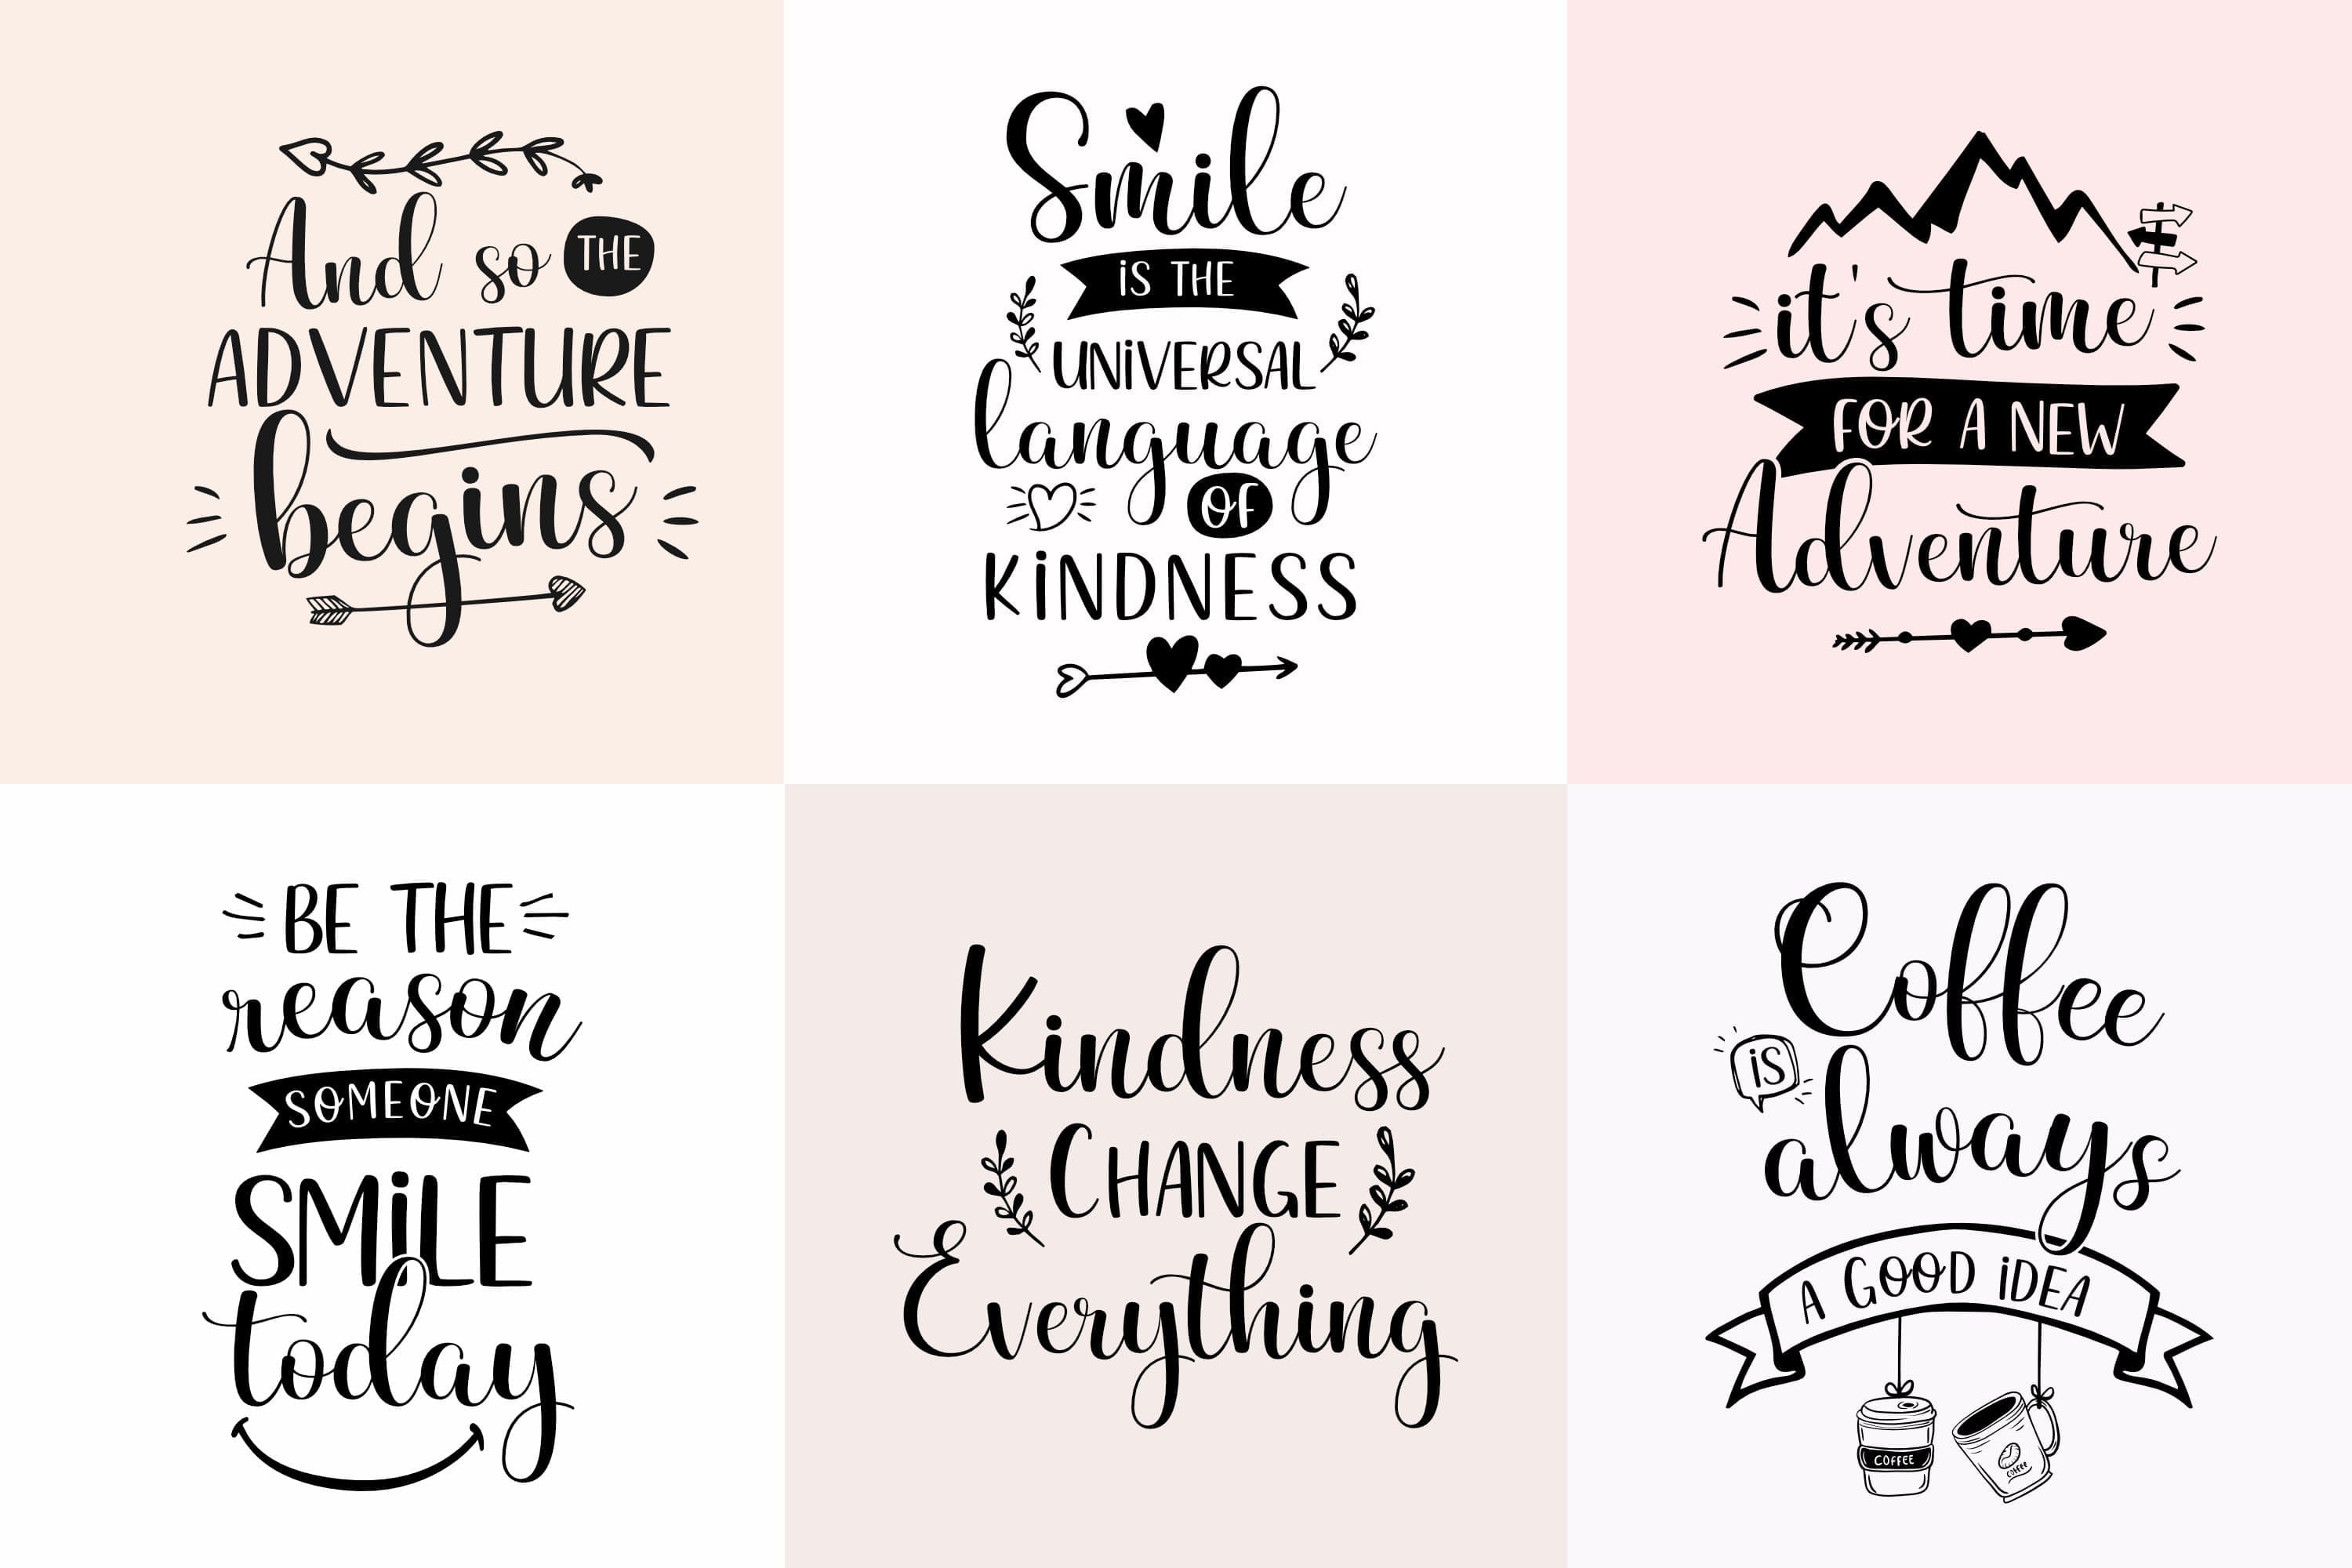 Six square banners "Smile is the Universal language of Kindness".